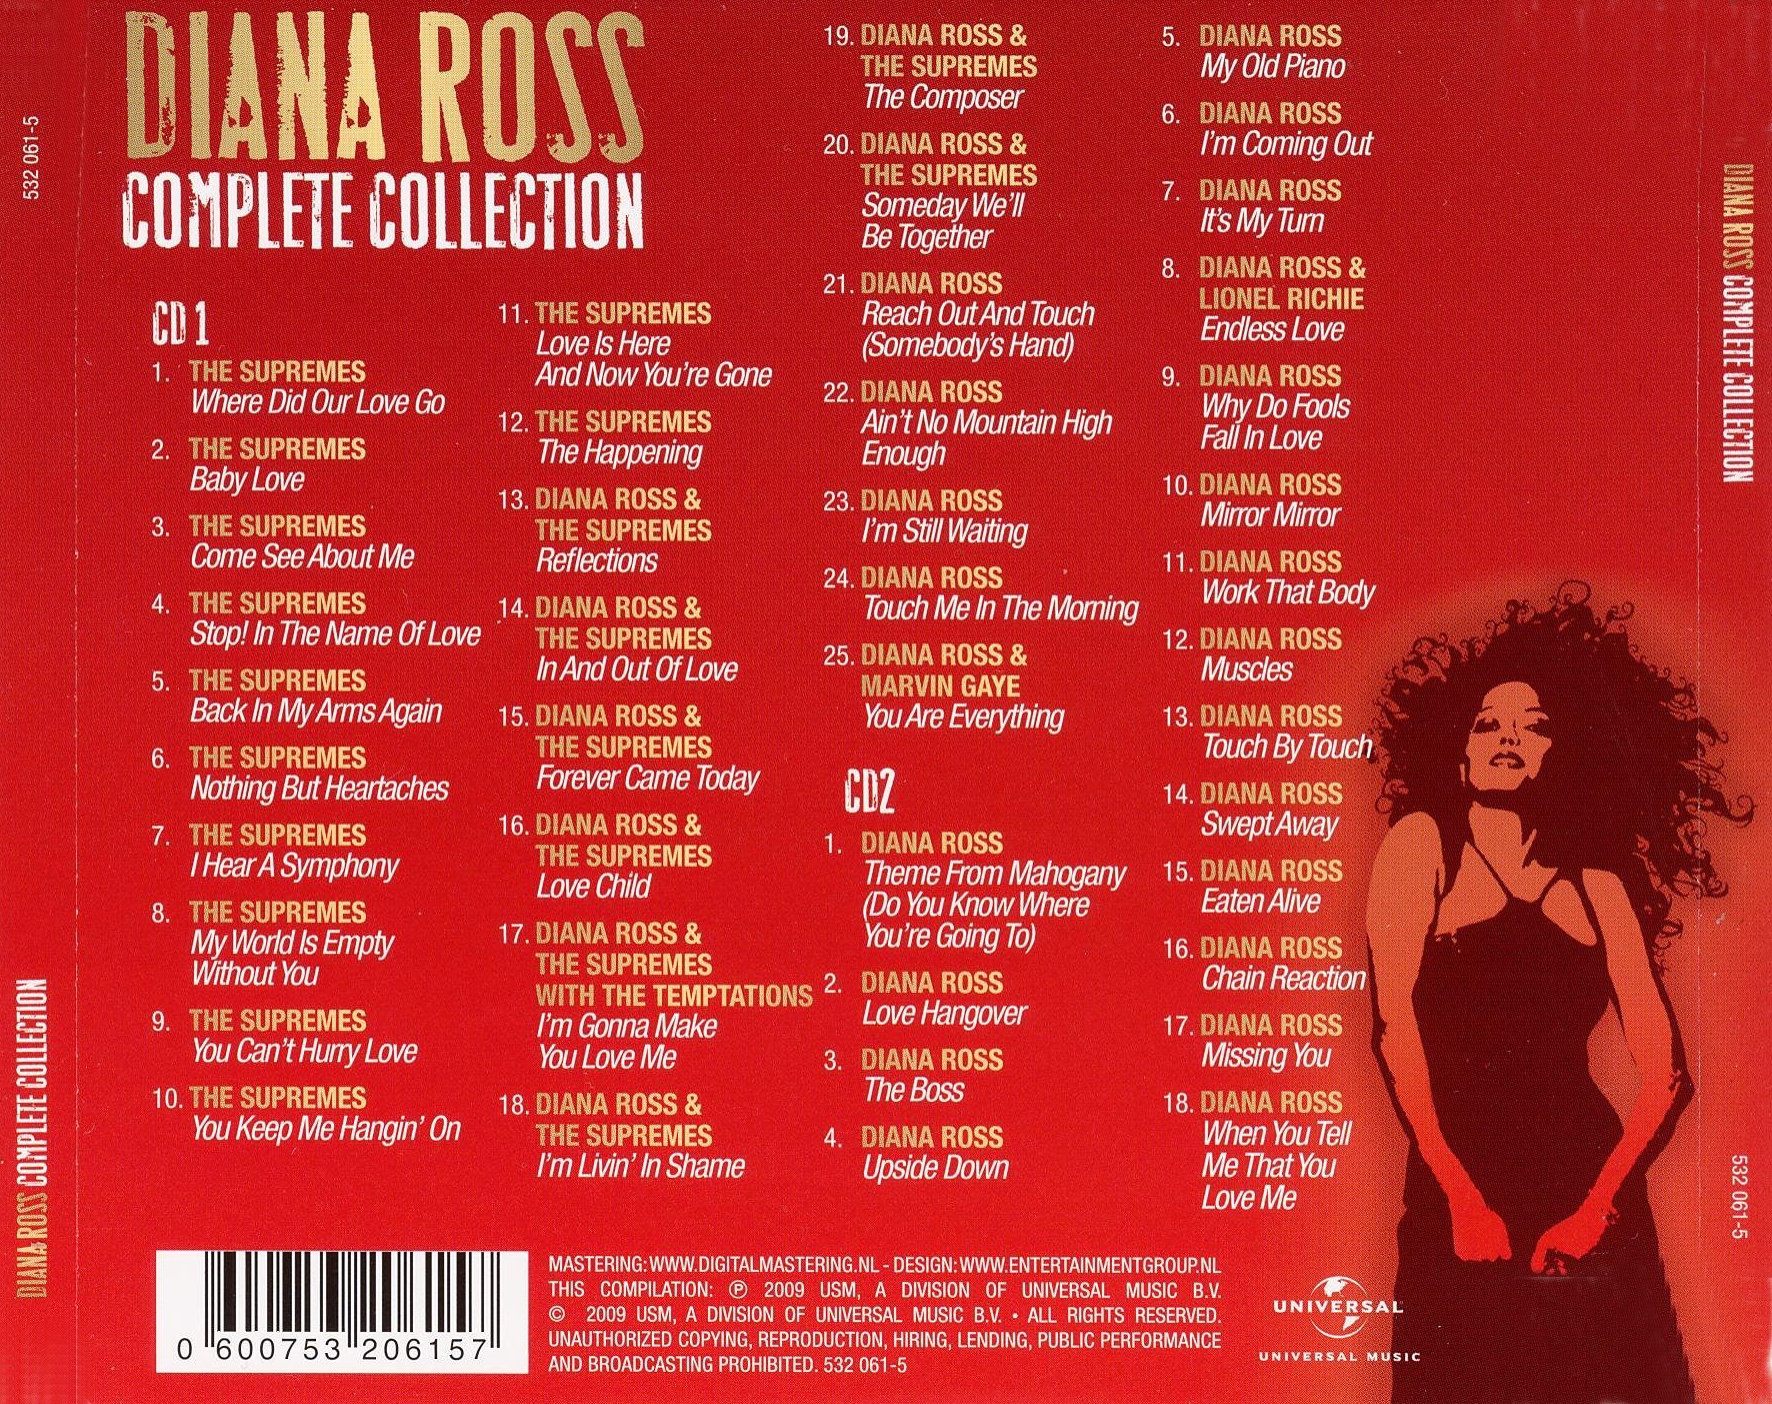 Diana Ross Discography at Discogs